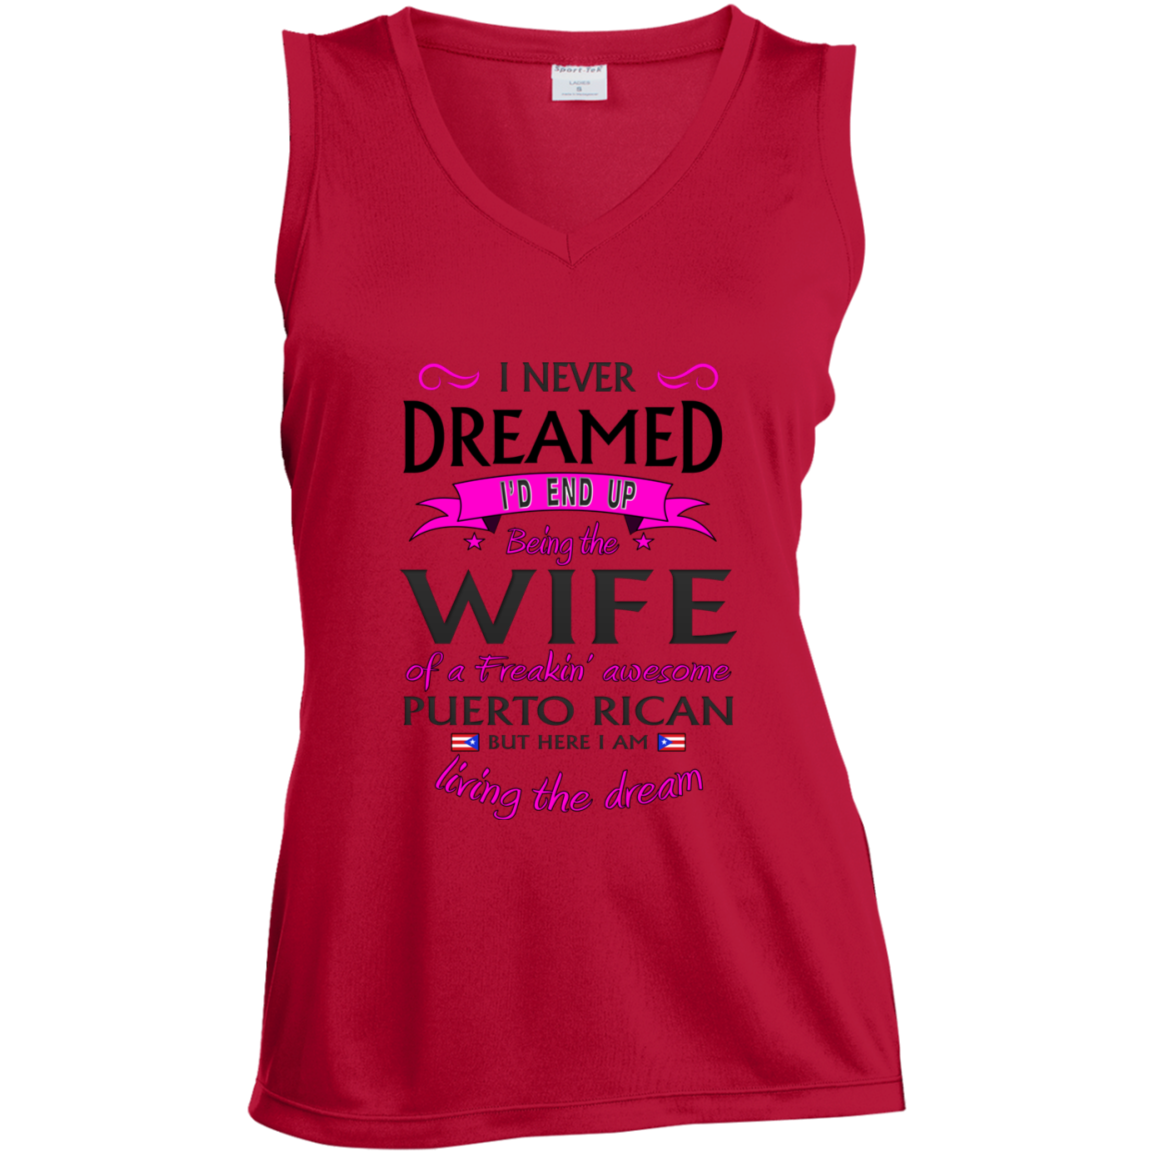 Wife of Awesome PR Sleeveless Moisture Absorbing V-Neck - Puerto Rican Pride